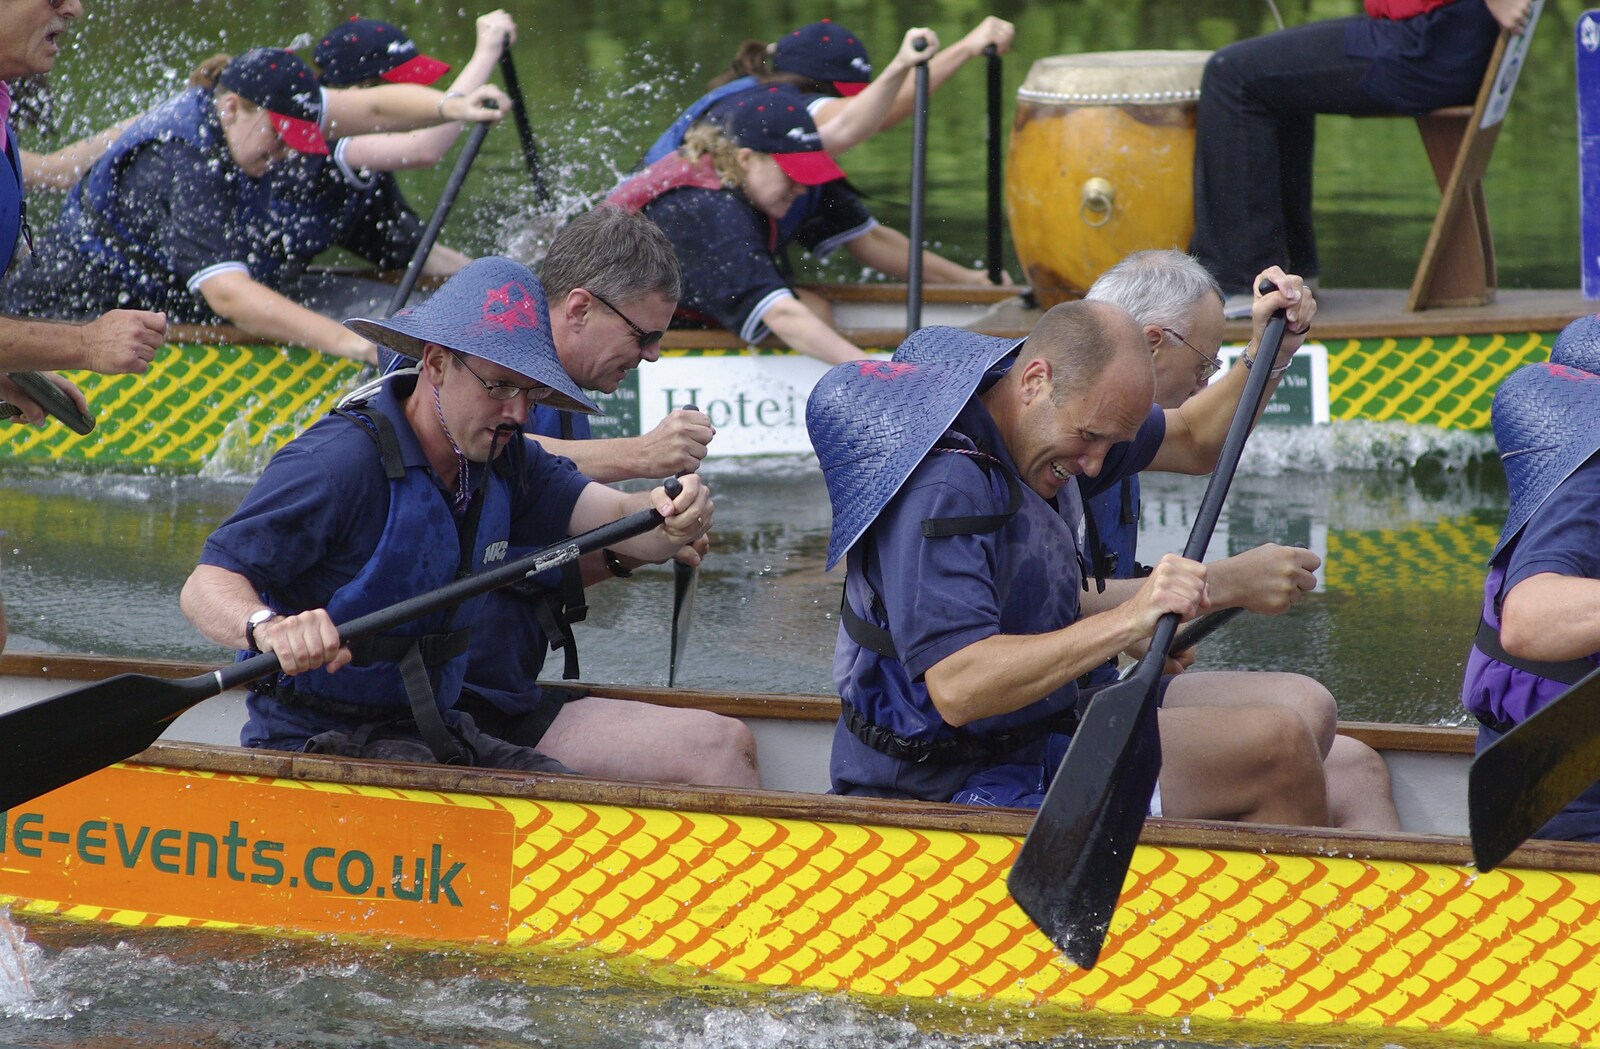 Qualcomm's Dragon-Boat Racing, Fen Ditton, Cambridge - 8th September 2007: Rowing with hats can't be easy